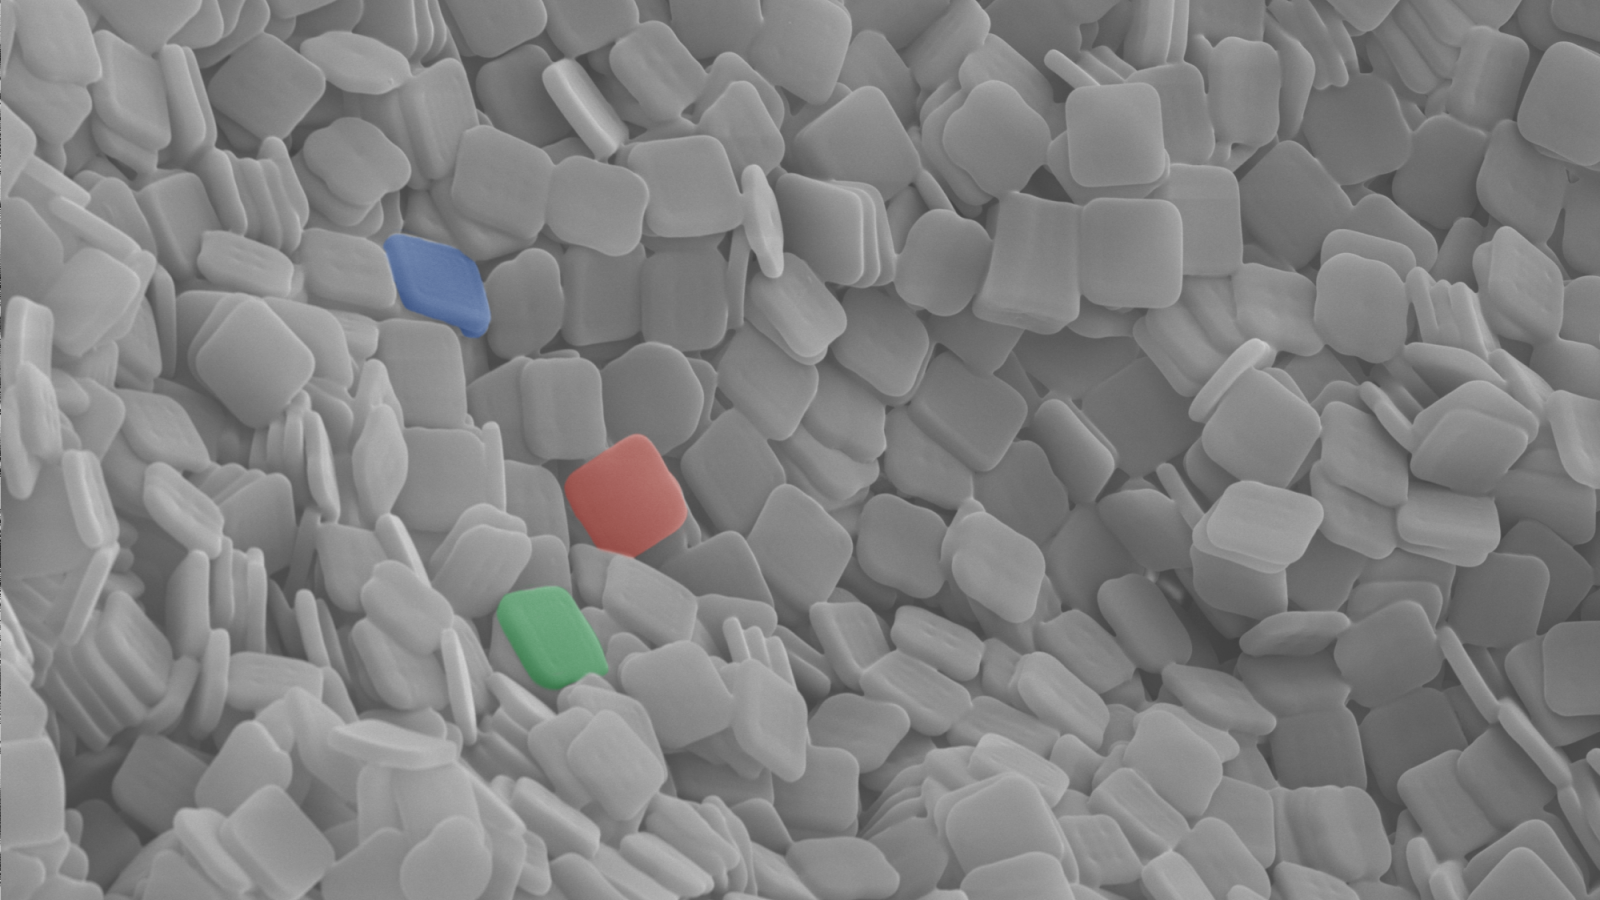 Nanoscale image of square-shaped cells with three of them being colored in blue, red, and green on the left side